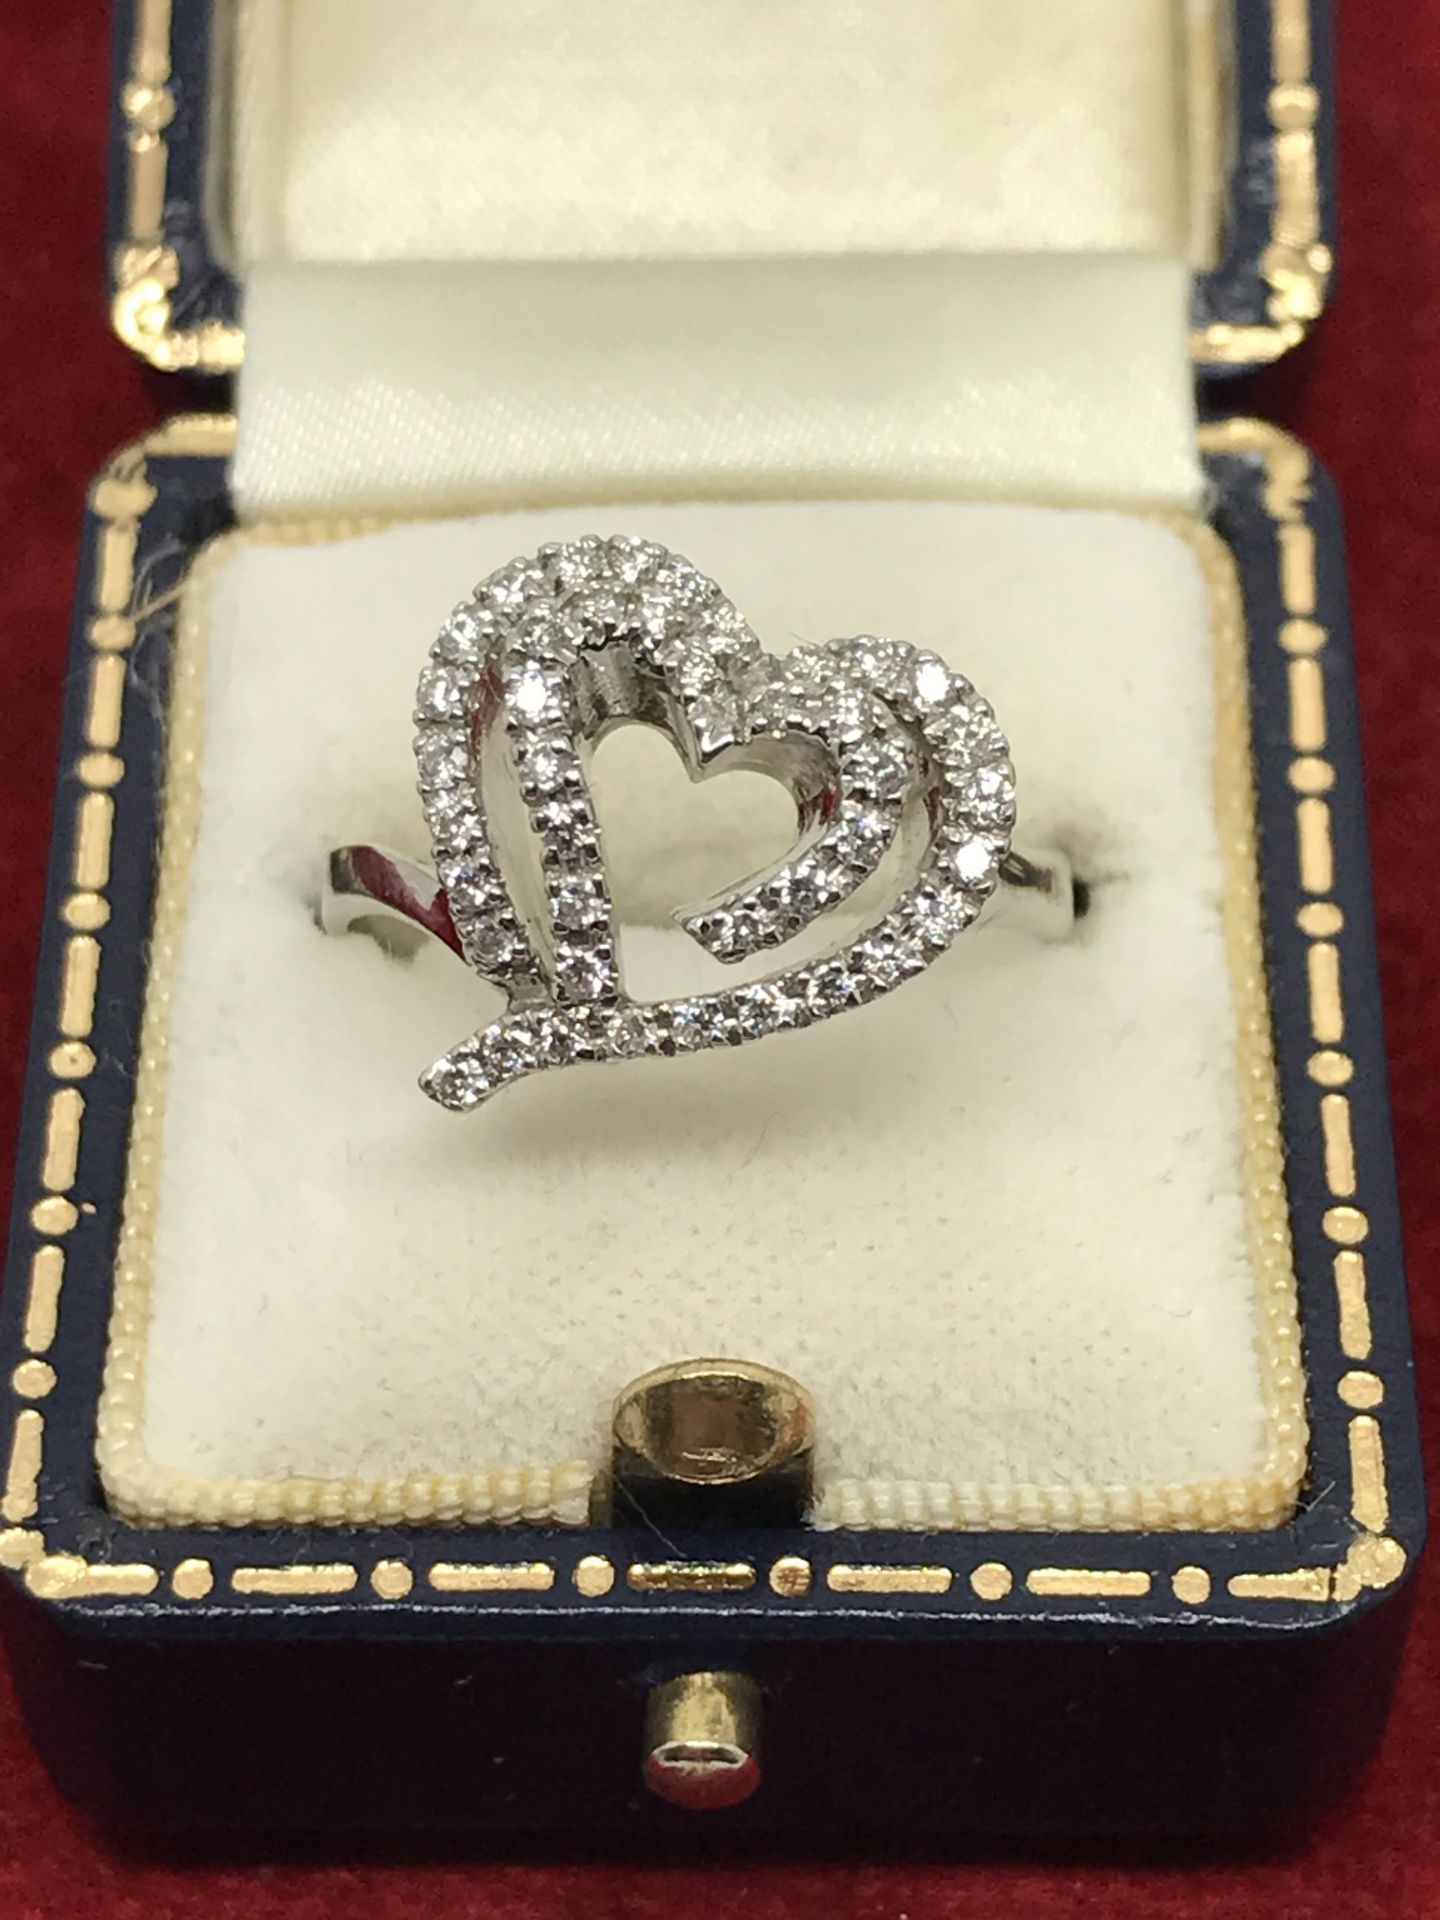 FINE DIAMOND SET HEART RING IN WHITE METAL TESTED AS 18ct GOLD